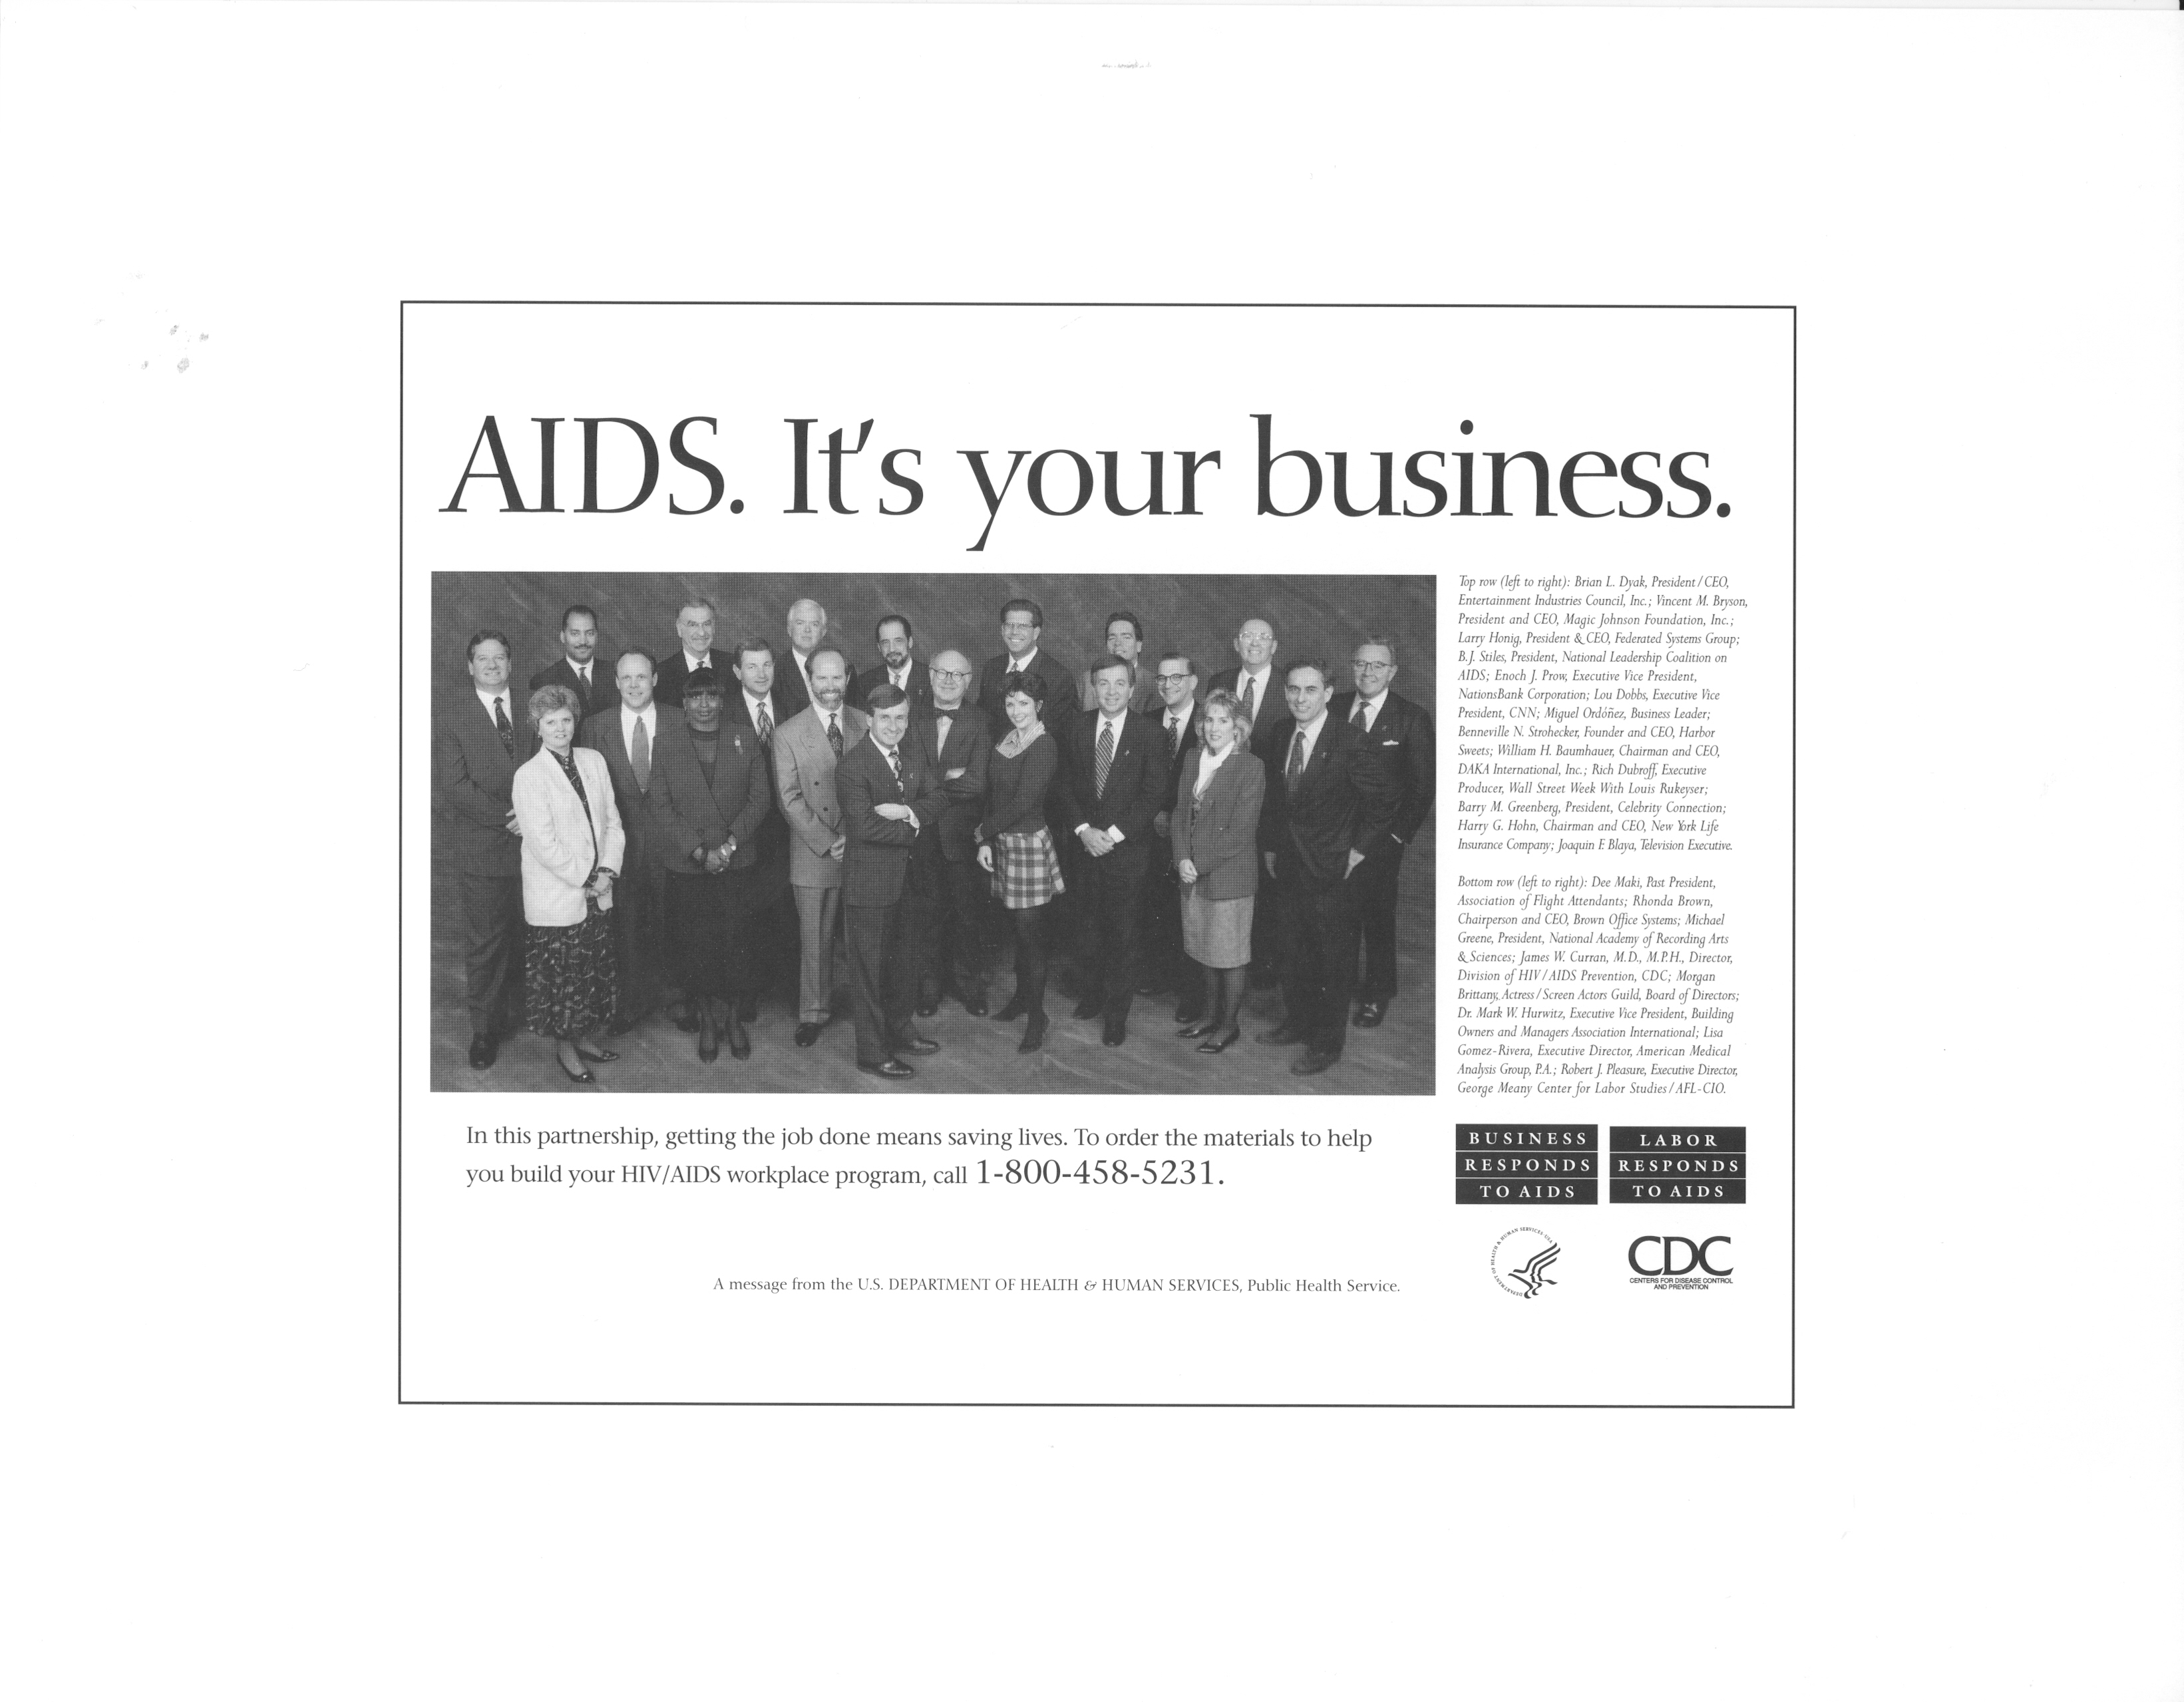 AIDS. It's your business.